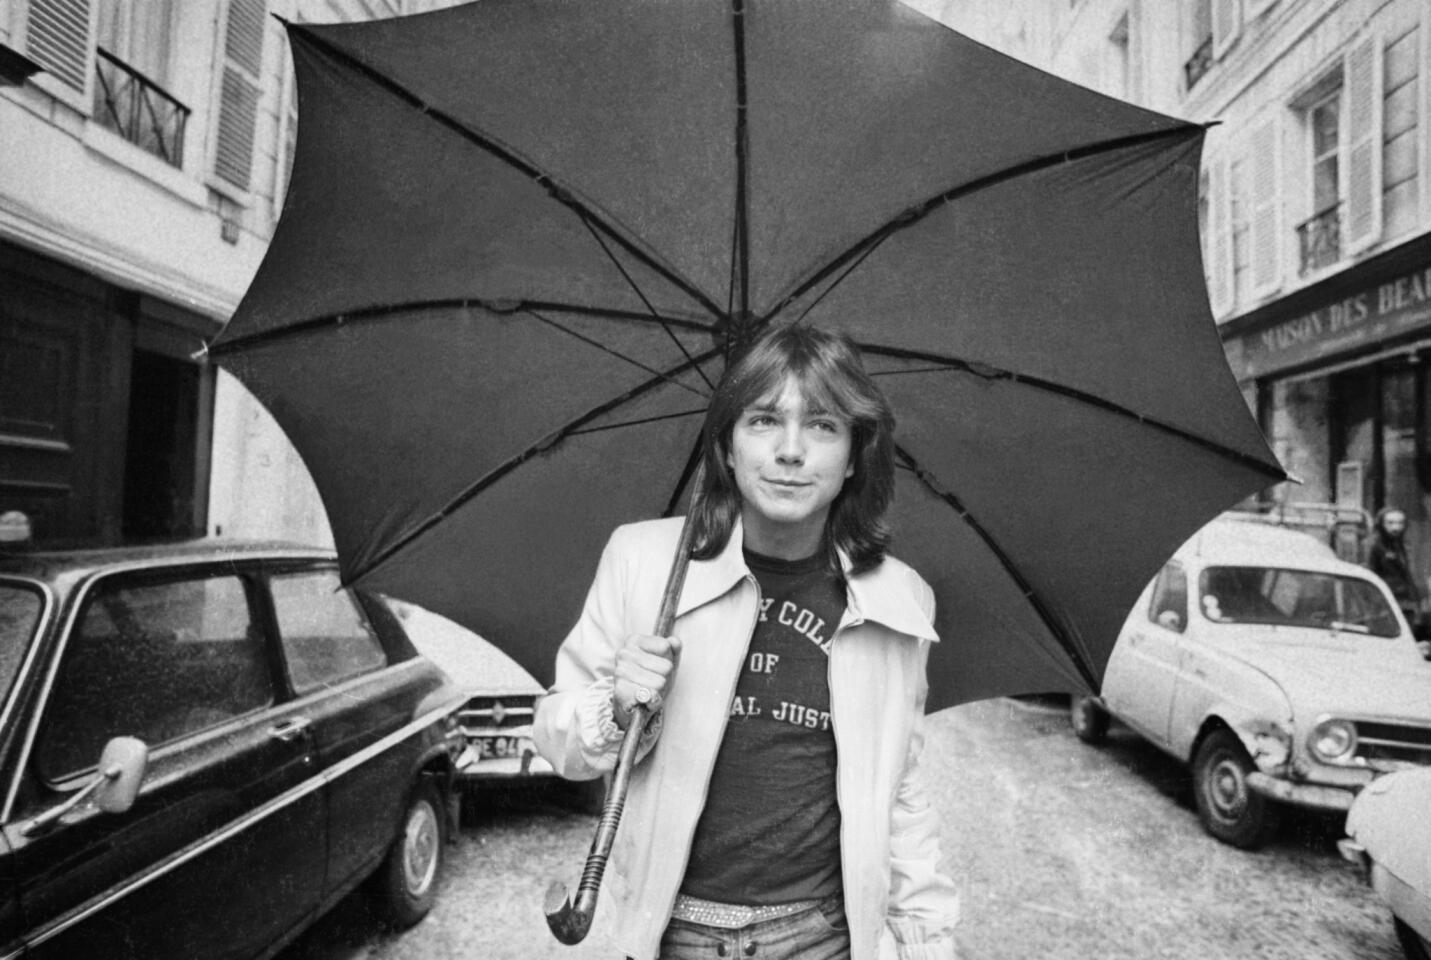 Clutching an umbrella, David Cassidy wanders down a road in London in 1974.